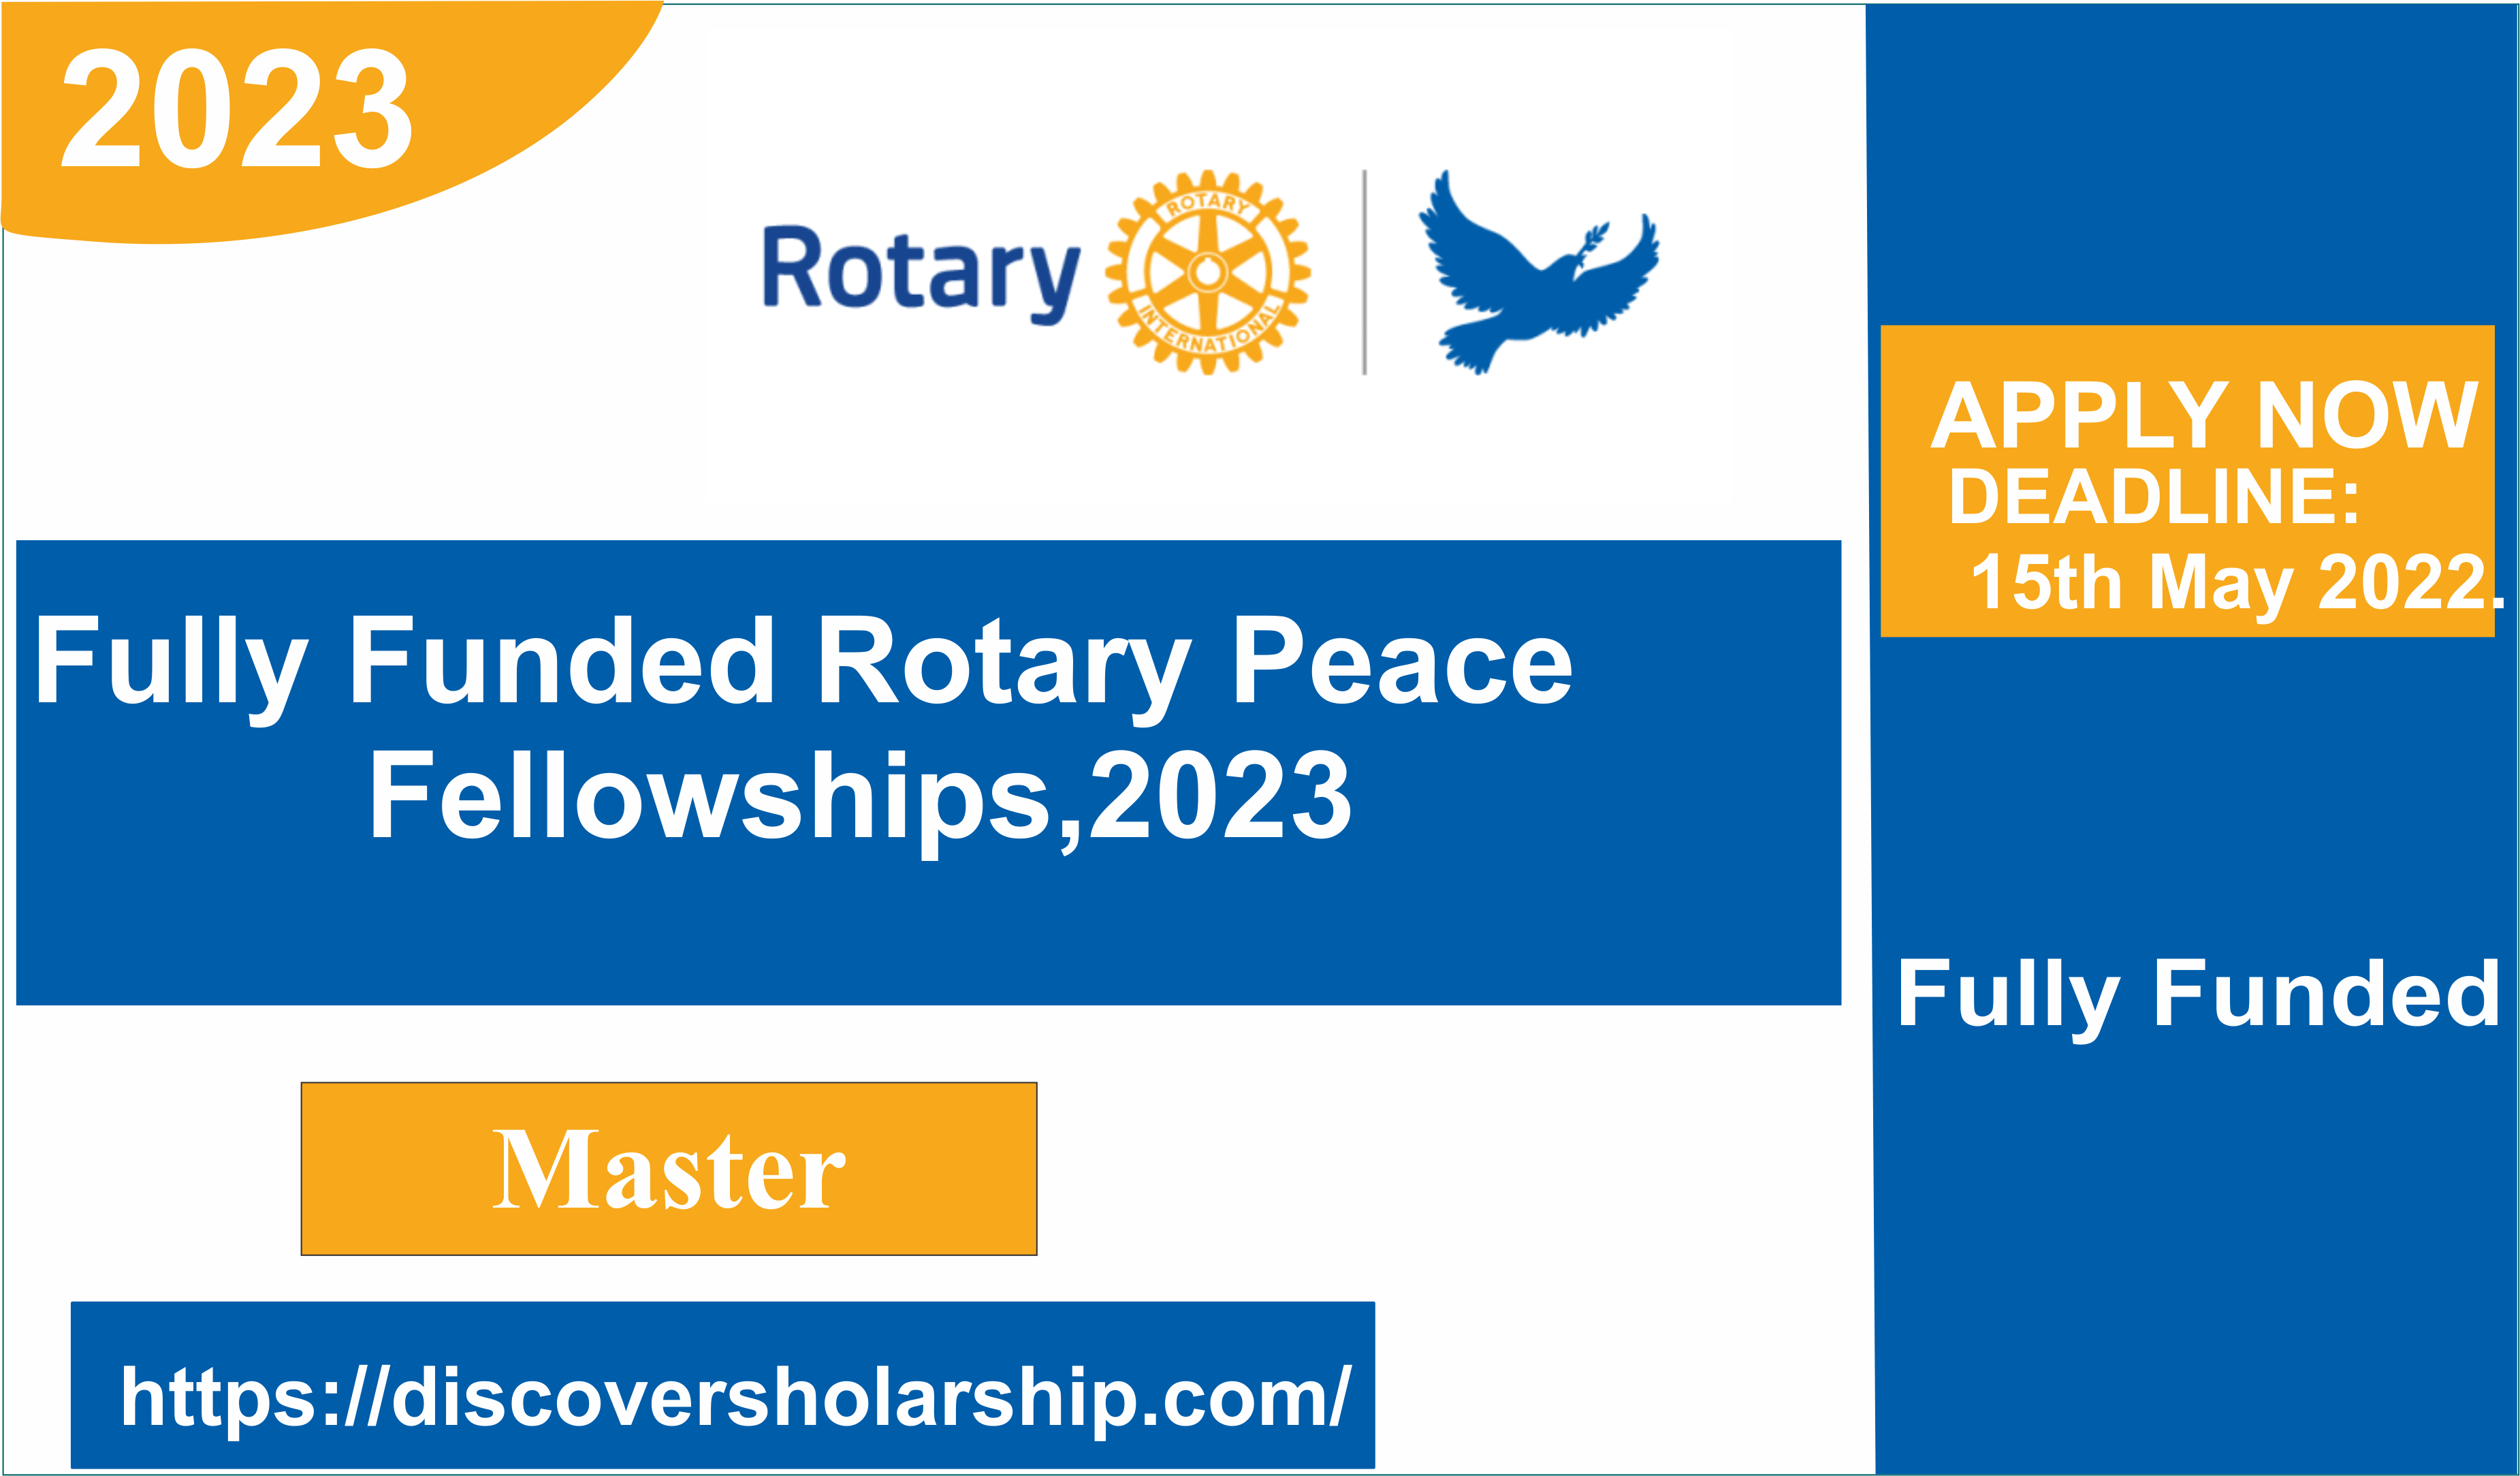 Fully Funded Rotary Peace Fellowships, 2023